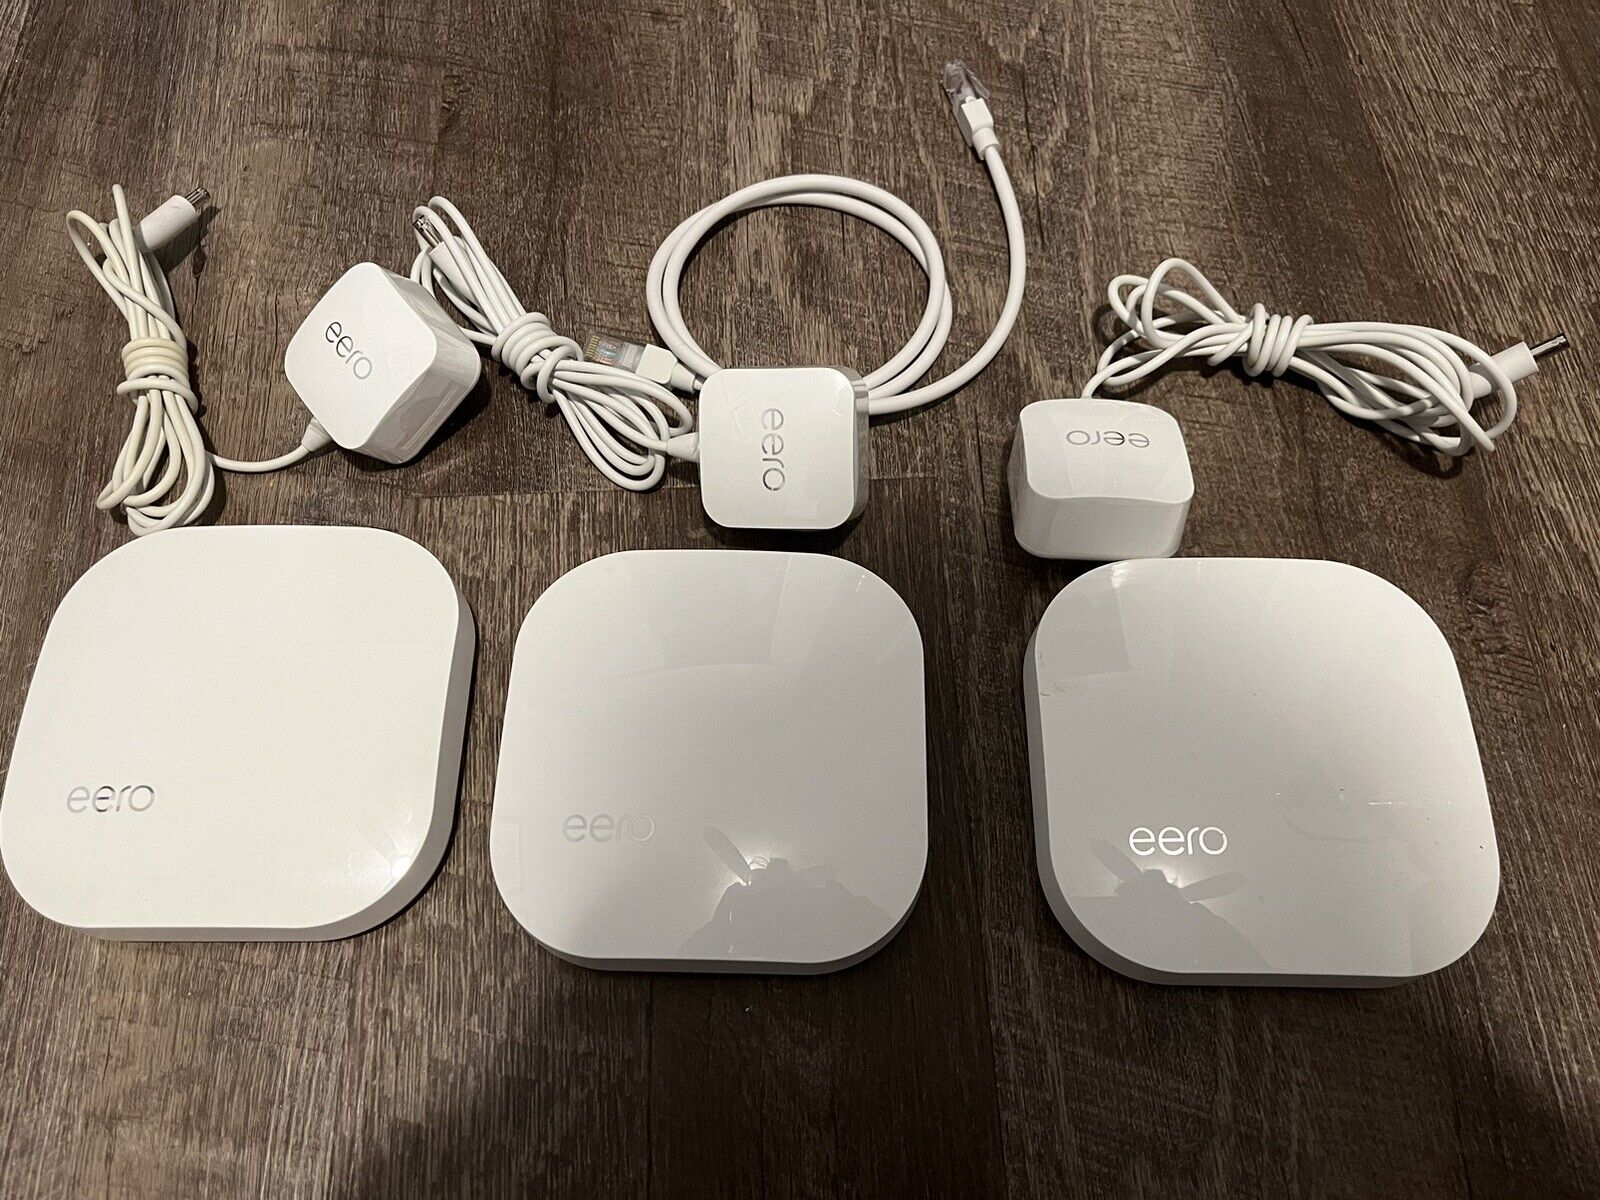 eero 1st Generation Home Mesh WiFi System - 3 Pack (Model A010001)